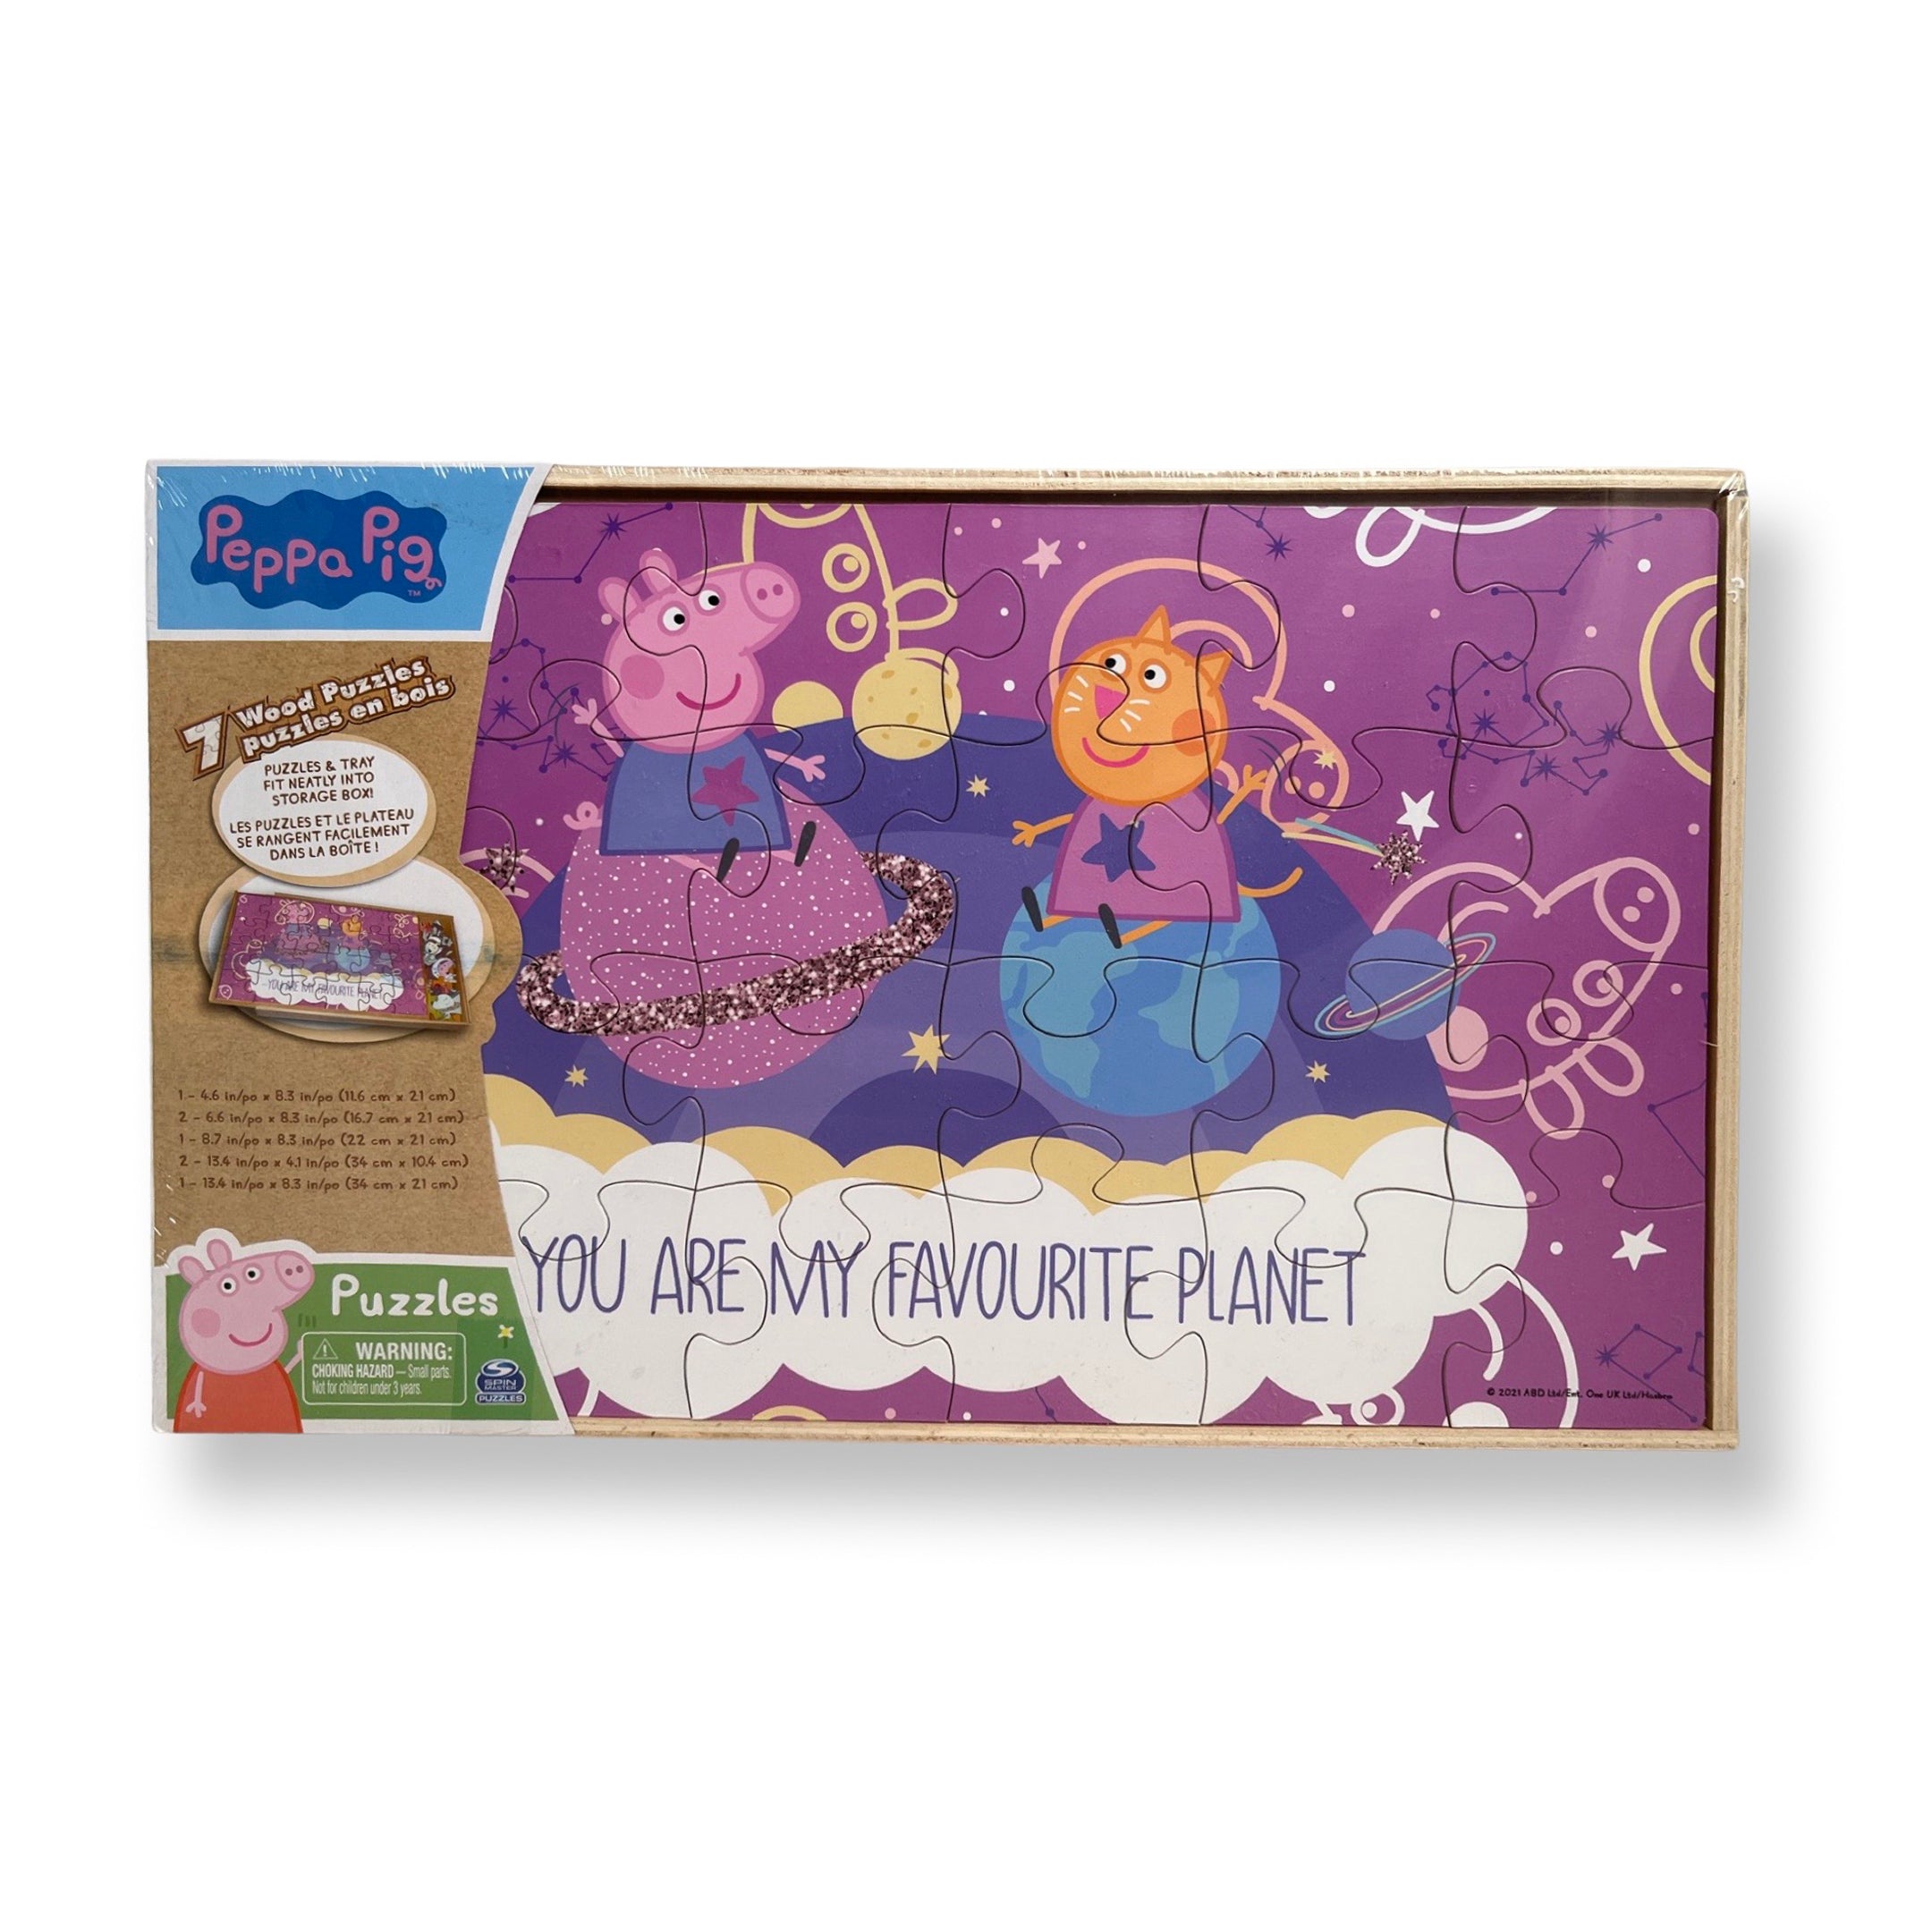 Hello Kitty® and Friends My Favorite Flavor 1000 Piece Puzzle